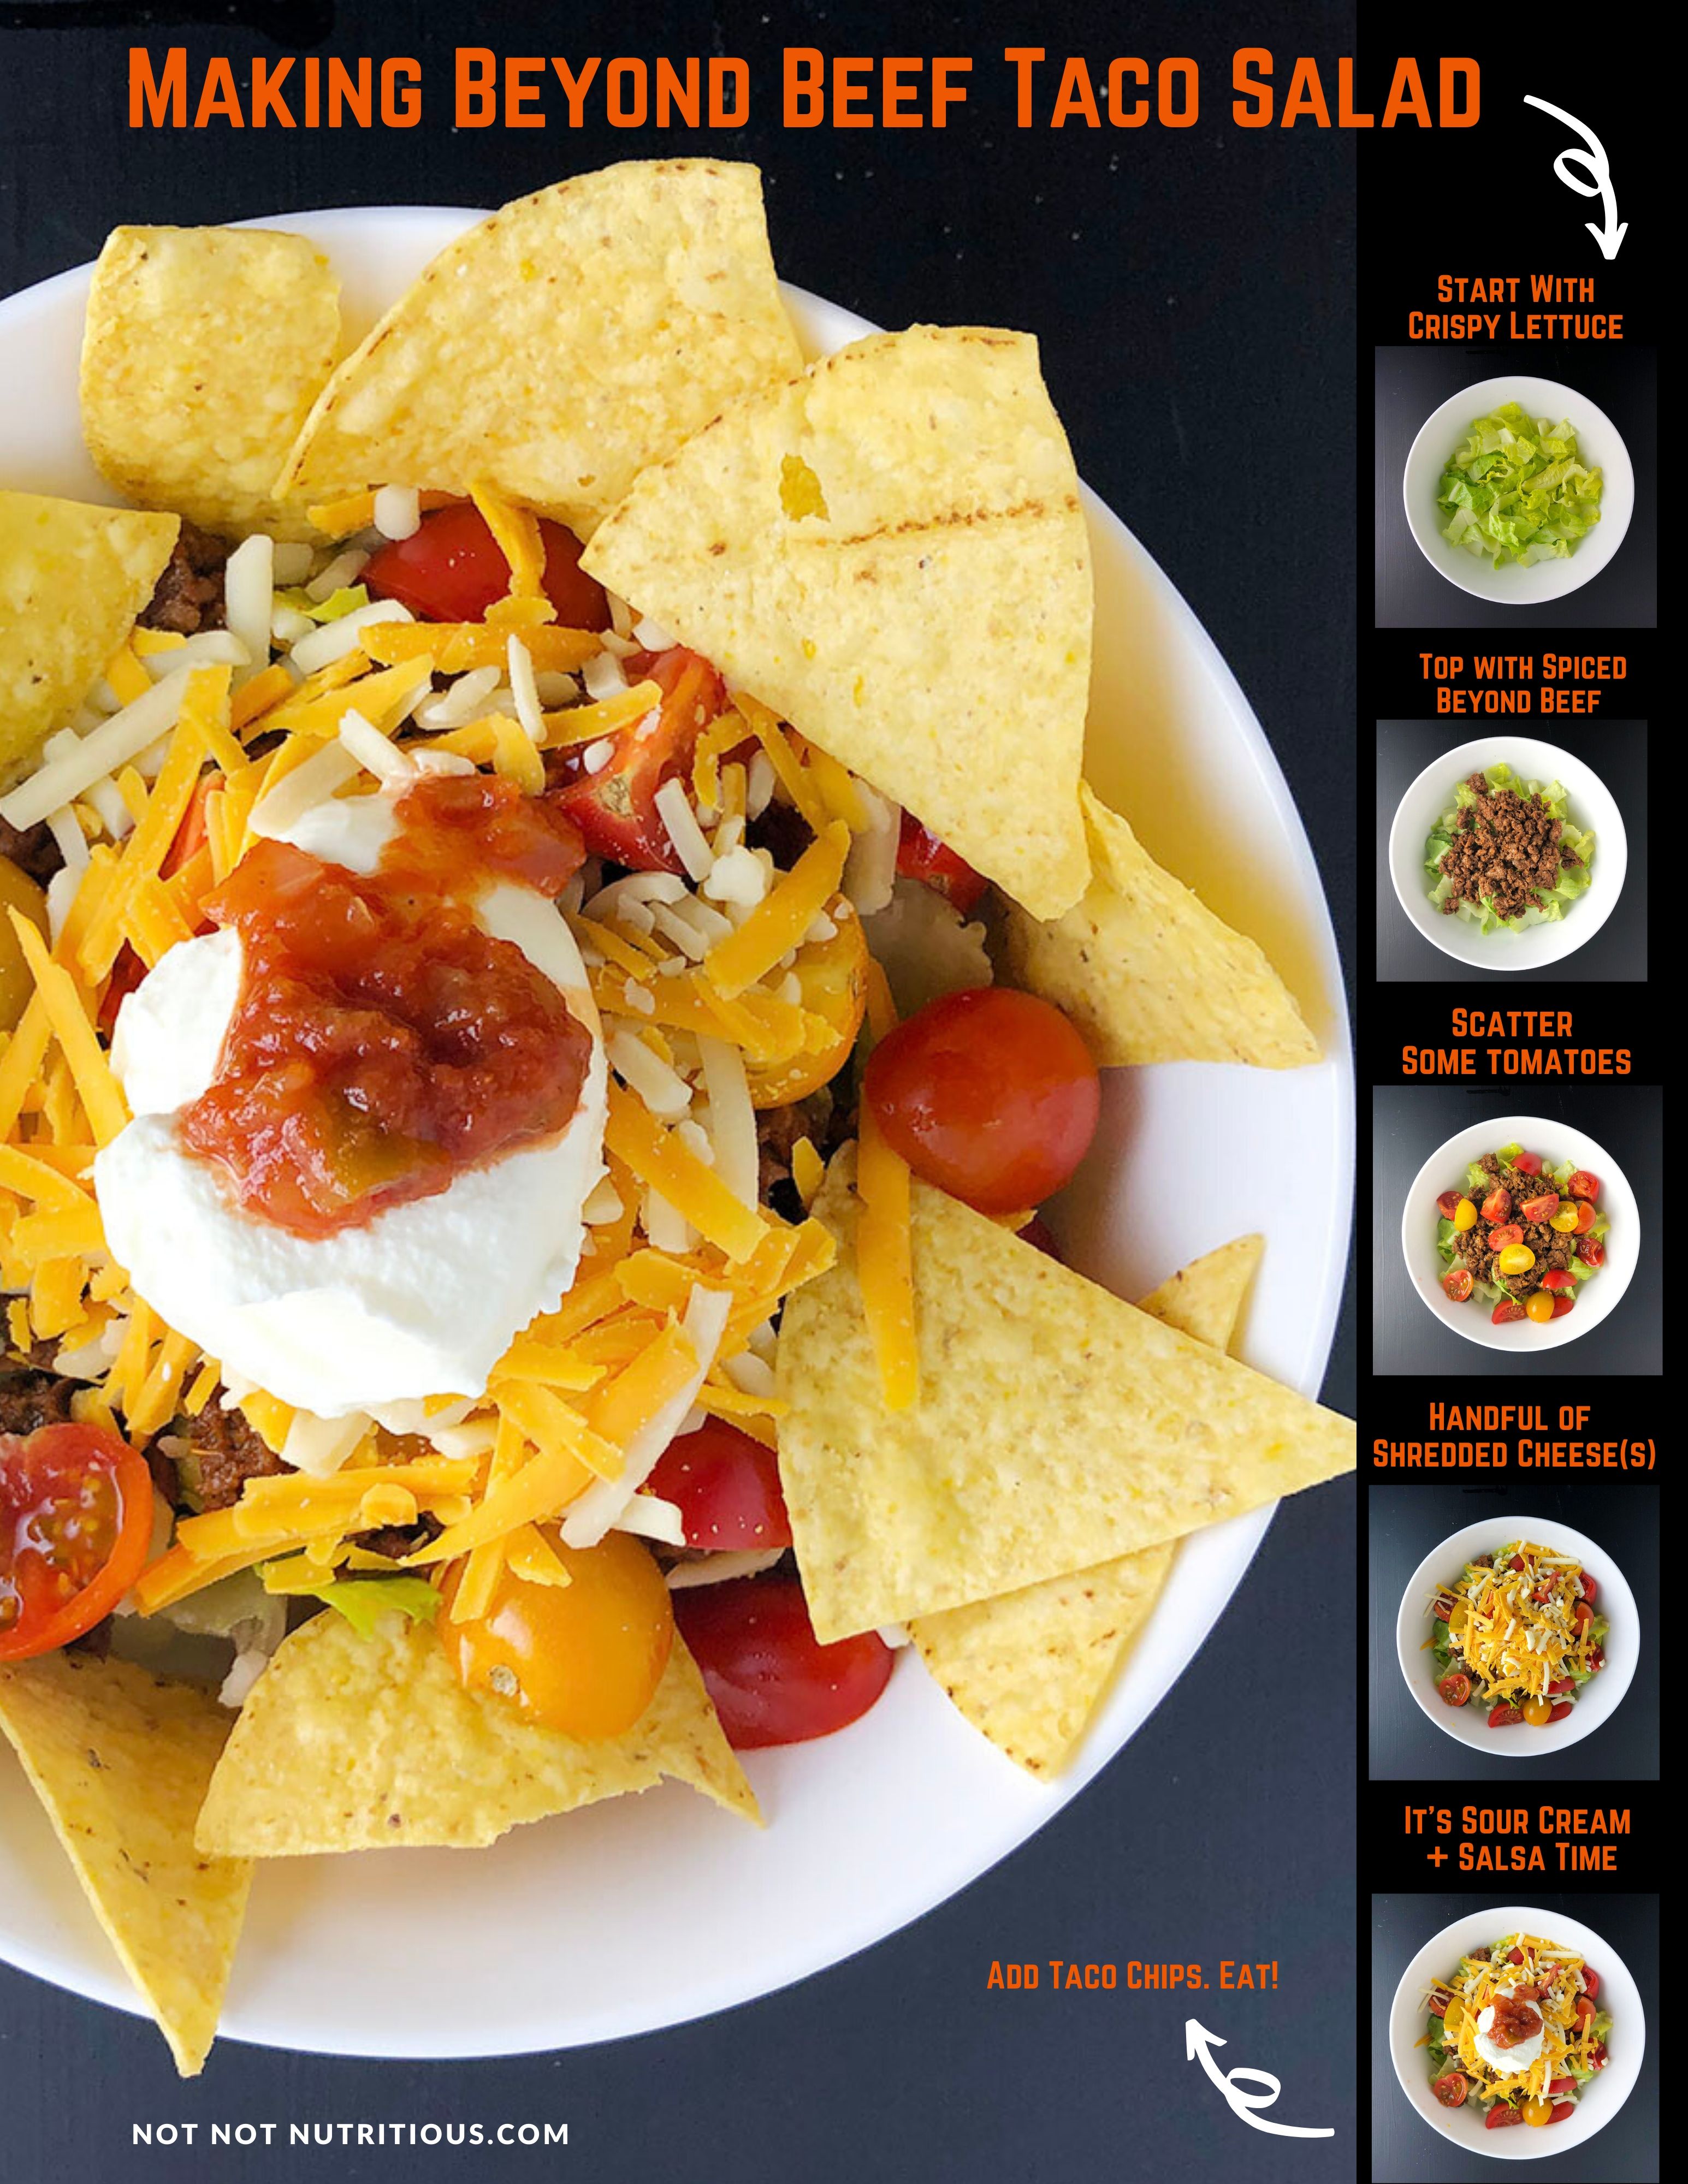 Infographic with top-down image of bowl of taco salad. Text reads: Making Beyond Beef Taco Salad with smaller images showing start with crispy lettuce (image of lettuce), top with spiced beyond beef (image of beef on top of lettuce), scatter some tomatoes (image of lettuce, beef, tomatoes, handful of shredded cheese(s), (image of shredded cheeses on top), it's sour cream and salsa time, (image showing that), and then a squiggly arrow pointing to the larger image of the finished Beyond Meat Taco Salad, with the text, add taco chips, eat! 